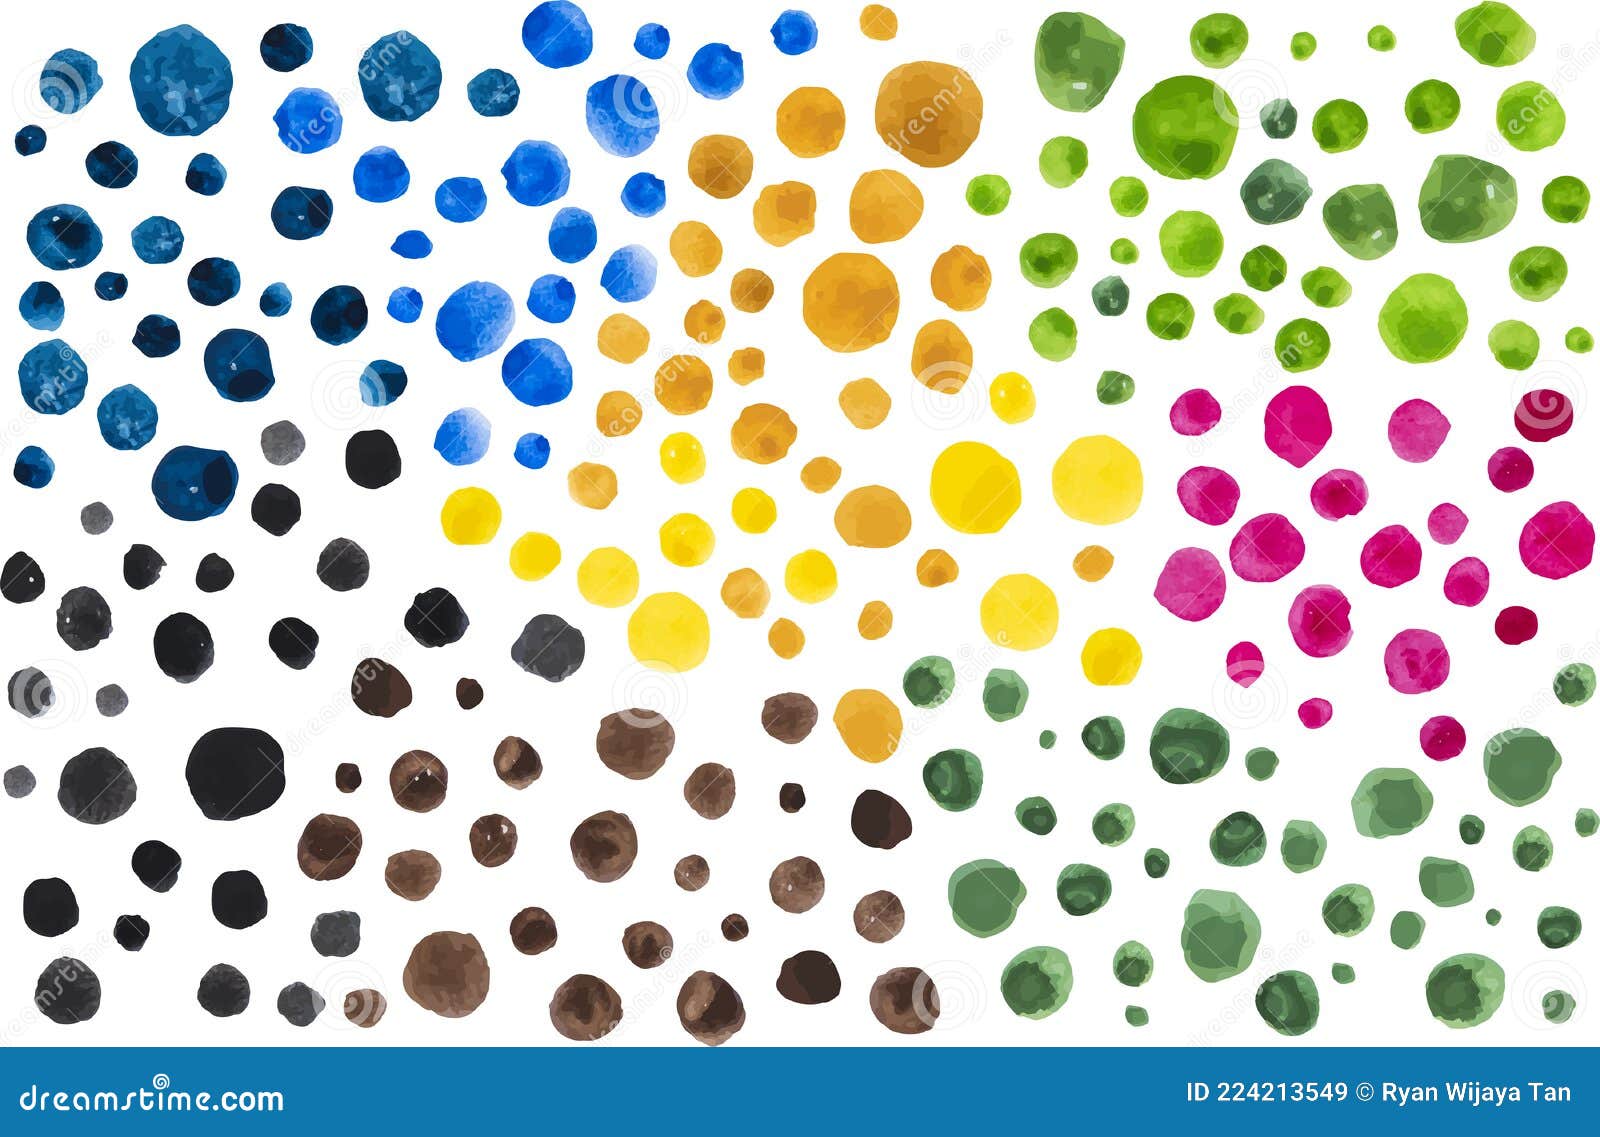 Colorful Vector Watercolors Circles Shapes For Design Pattern